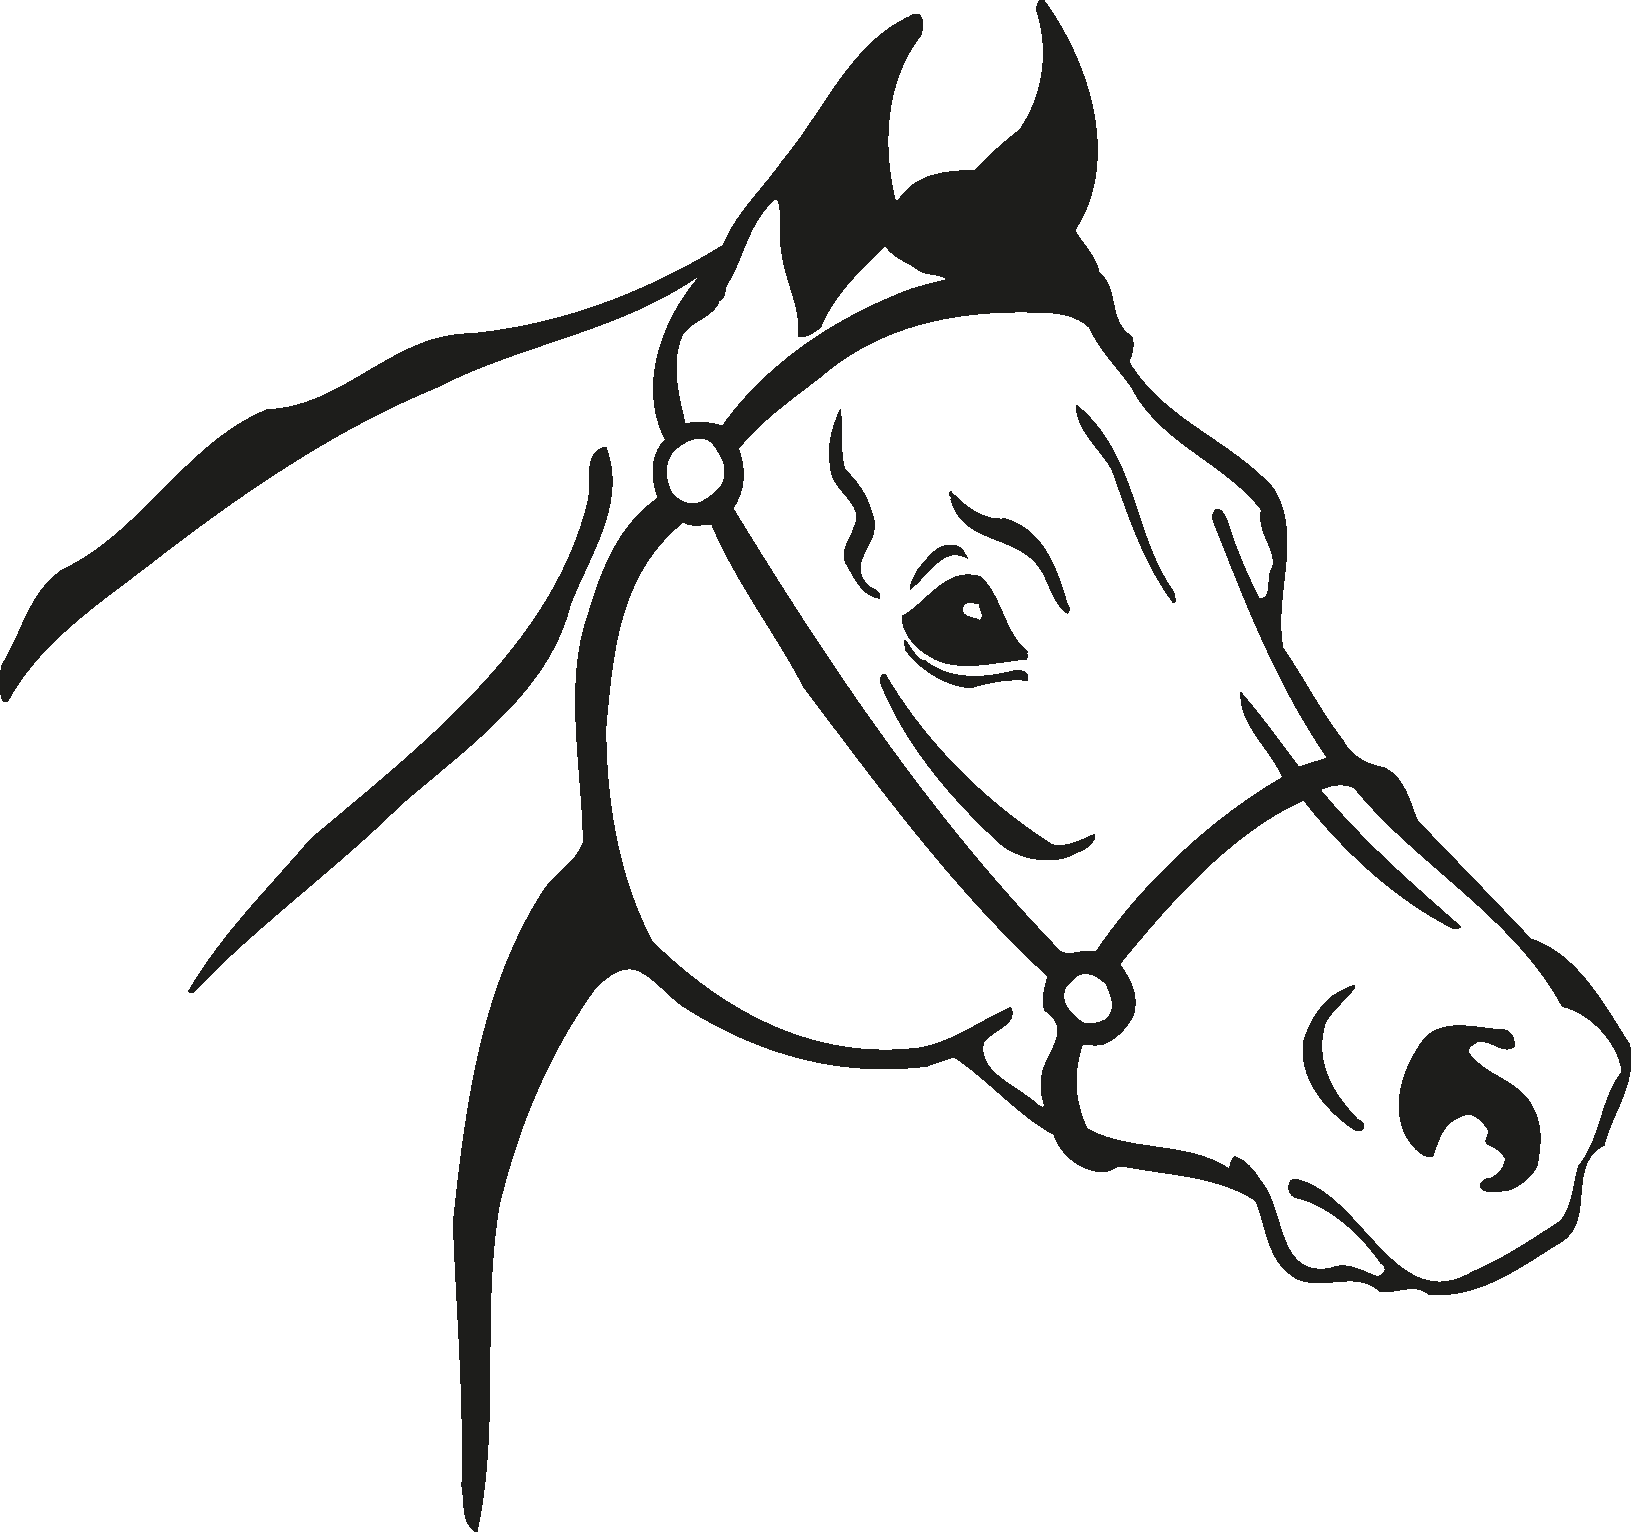 Horse Head Silhouette Png.